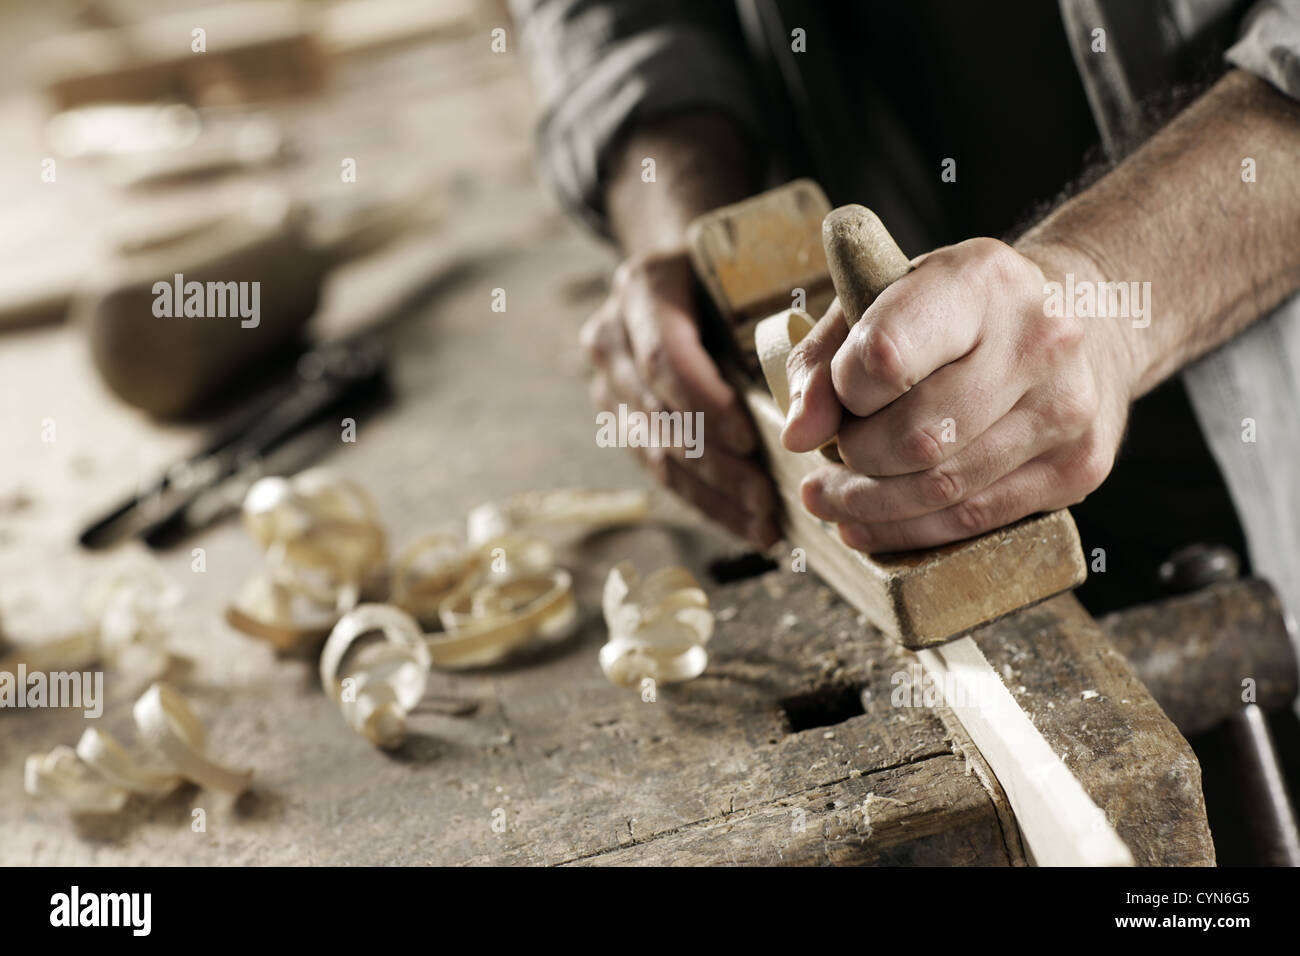 Hands of a carpenter planed wood, workplace Stock Photo